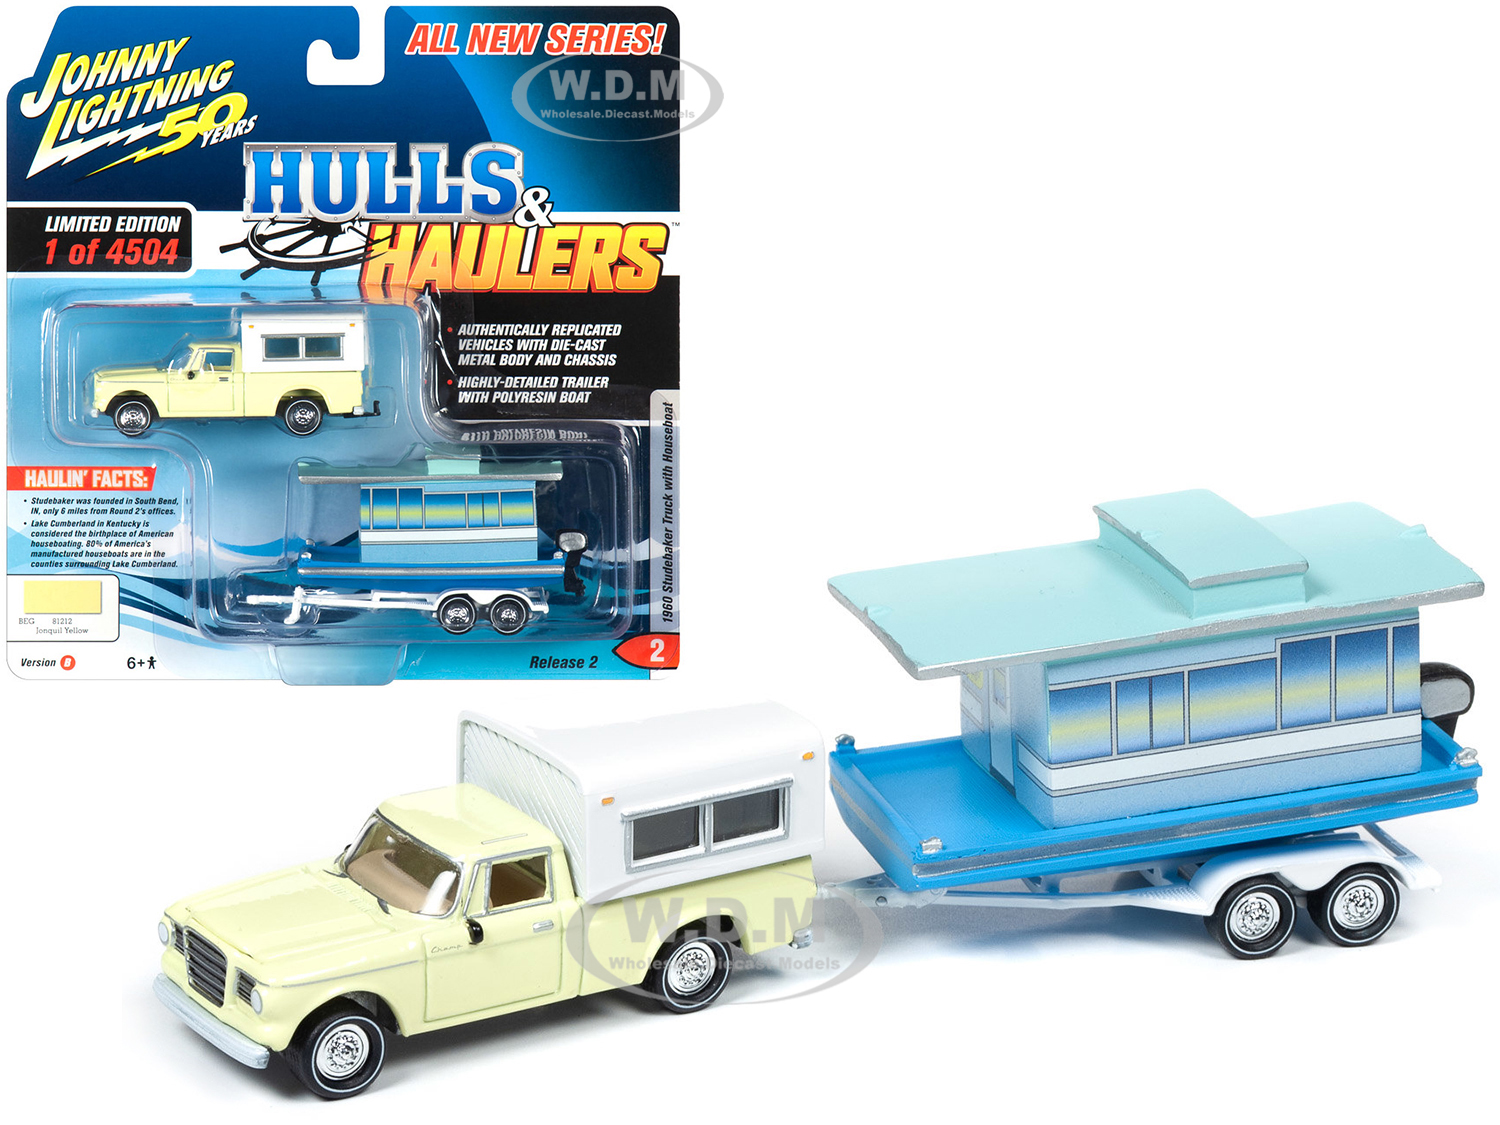 1960 Studebaker Pickup Truck with Camper Shell Jonquil Yellow with Houseboat Limited Edition to 4504 pieces Worldwide "Hulls &amp; Haulers" Series 2